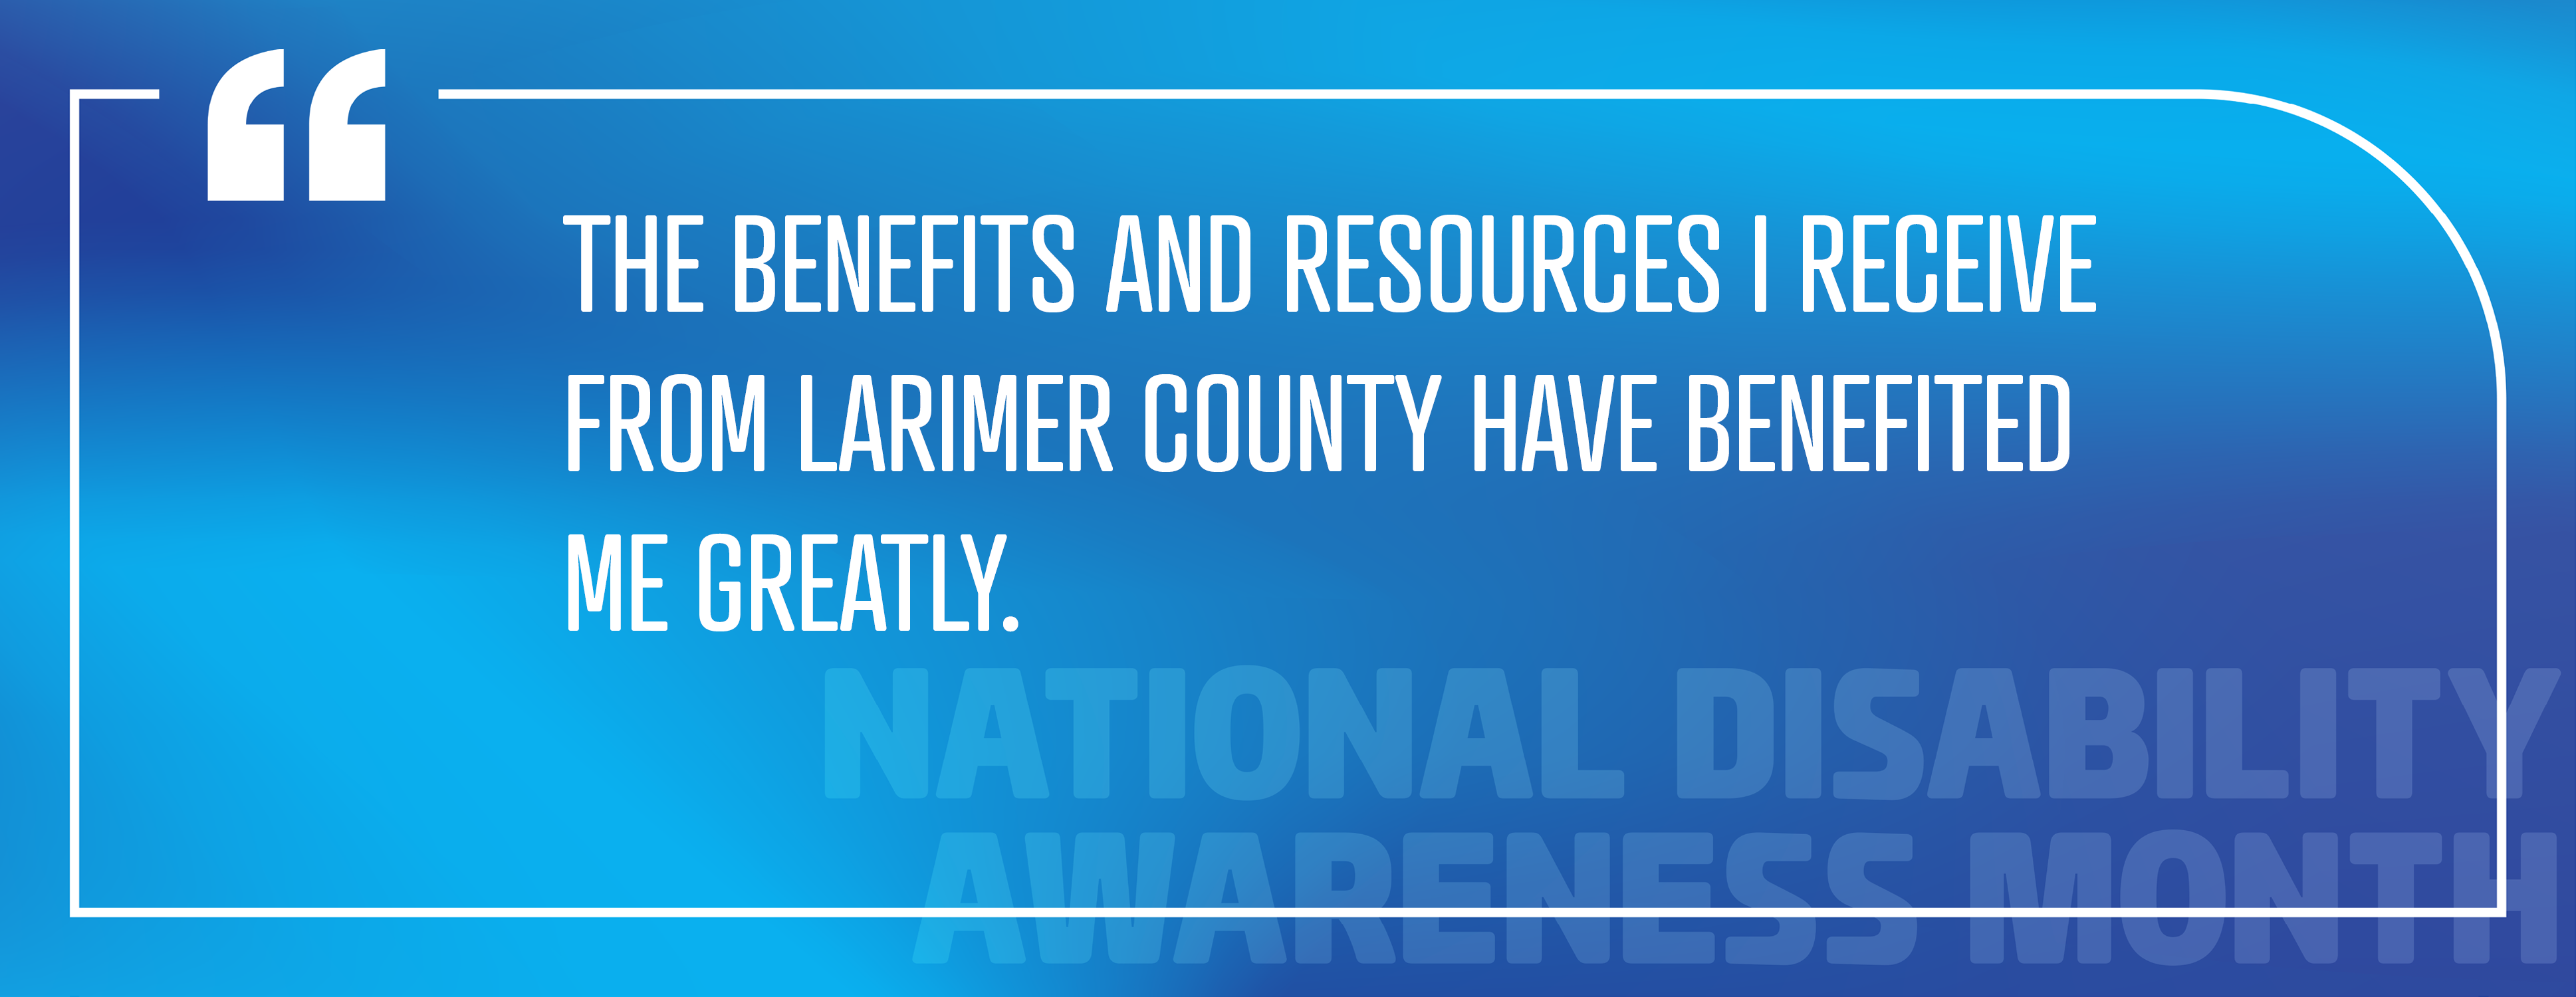 Image 5: "The benefits and resources I receive from Larimer County have benefited me greatly."